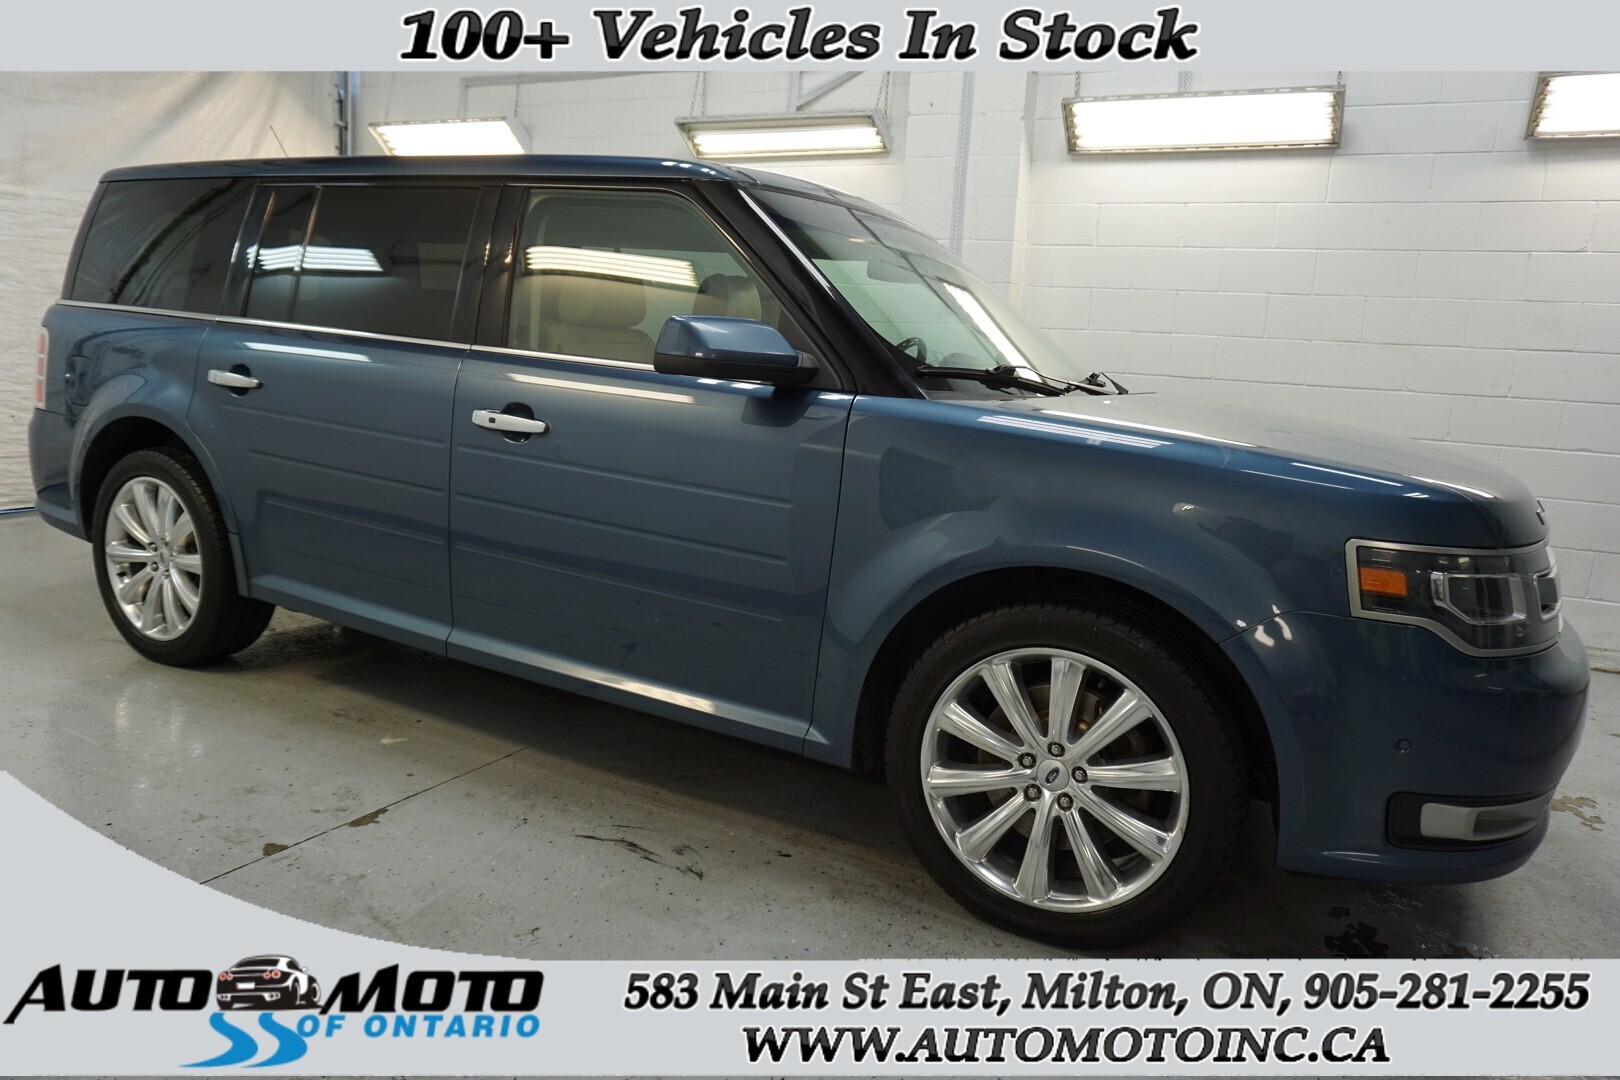 2019 Ford Flex LIMITED V6 AWD CERTIFIED 7 SEATS *ACCIDENT FREE* C